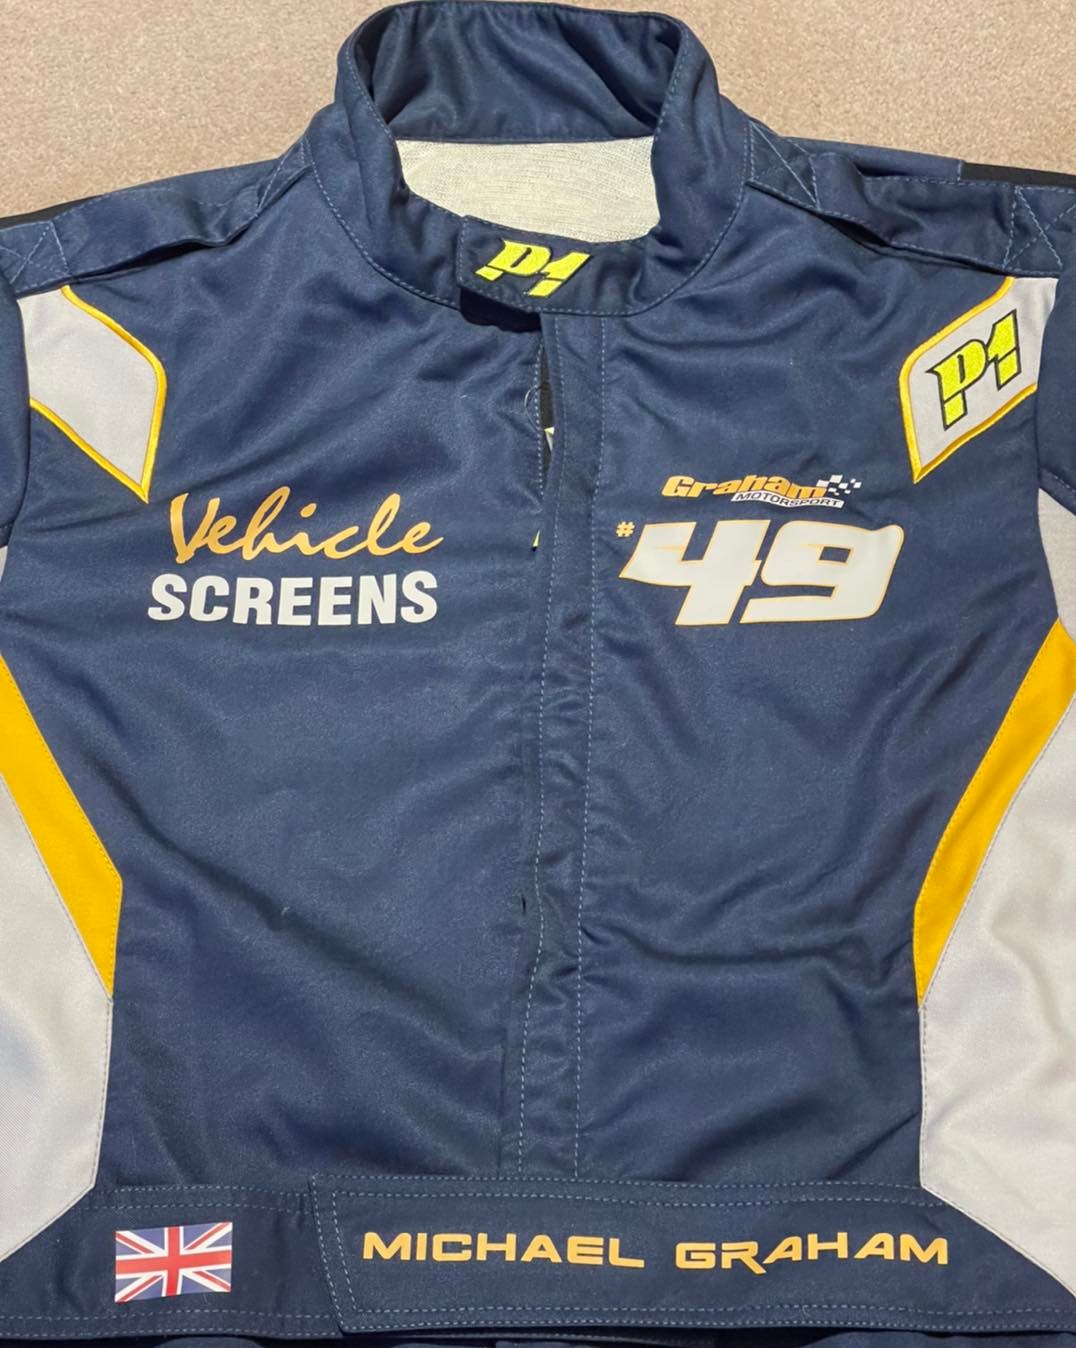 Fully Customised P1 Racesuit and Underwear tops